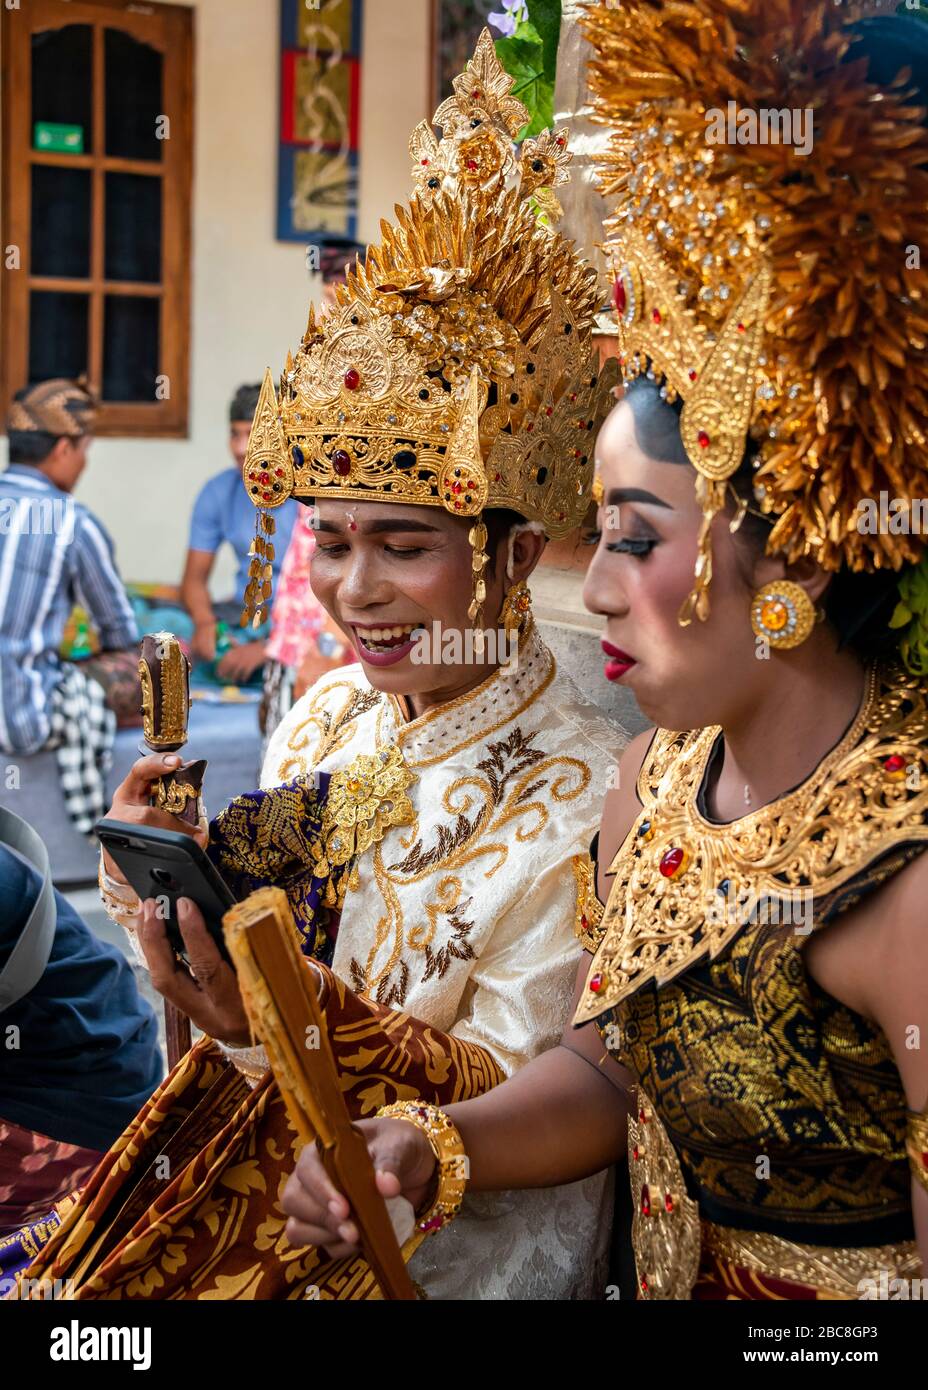 Vertical portrait of a bride and groom Facetiming at a Balinese wedding, Indonesia. Stock Photo